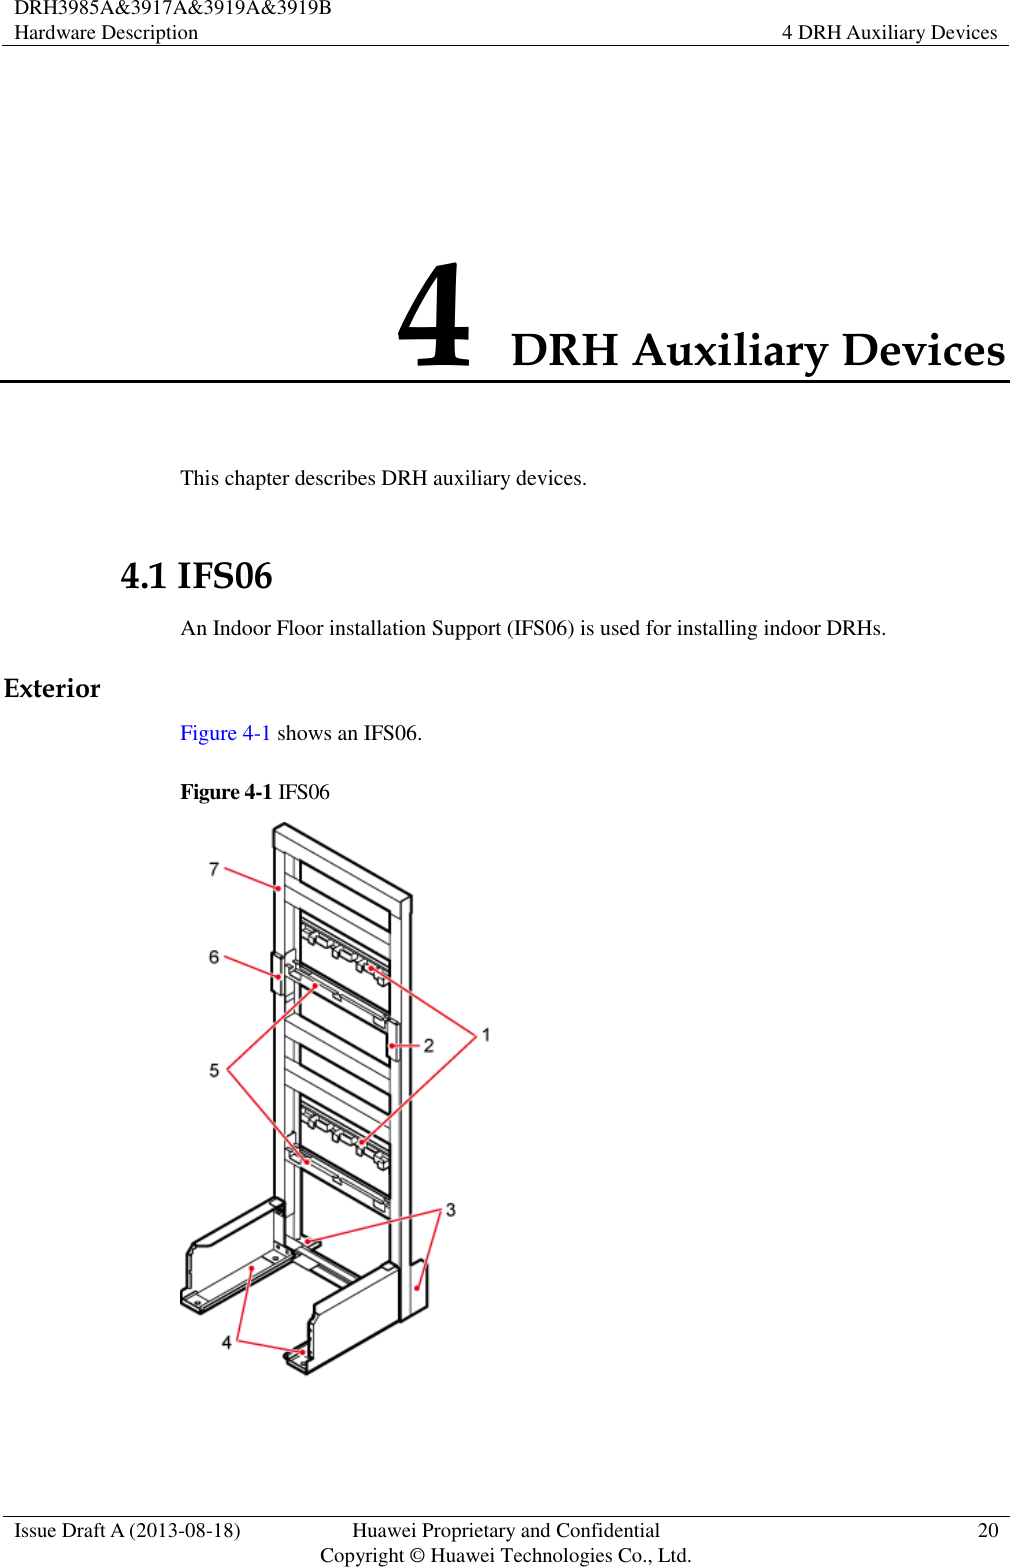 DRH3985A&amp;3917A&amp;3919A&amp;3919B Hardware Description 4 DRH Auxiliary Devices  Issue Draft A (2013-08-18) Huawei Proprietary and Confidential                                     Copyright © Huawei Technologies Co., Ltd. 20  4 DRH Auxiliary Devices This chapter describes DRH auxiliary devices. 4.1 IFS06 An Indoor Floor installation Support (IFS06) is used for installing indoor DRHs. Exterior Figure 4-1 shows an IFS06. Figure 4-1 IFS06   